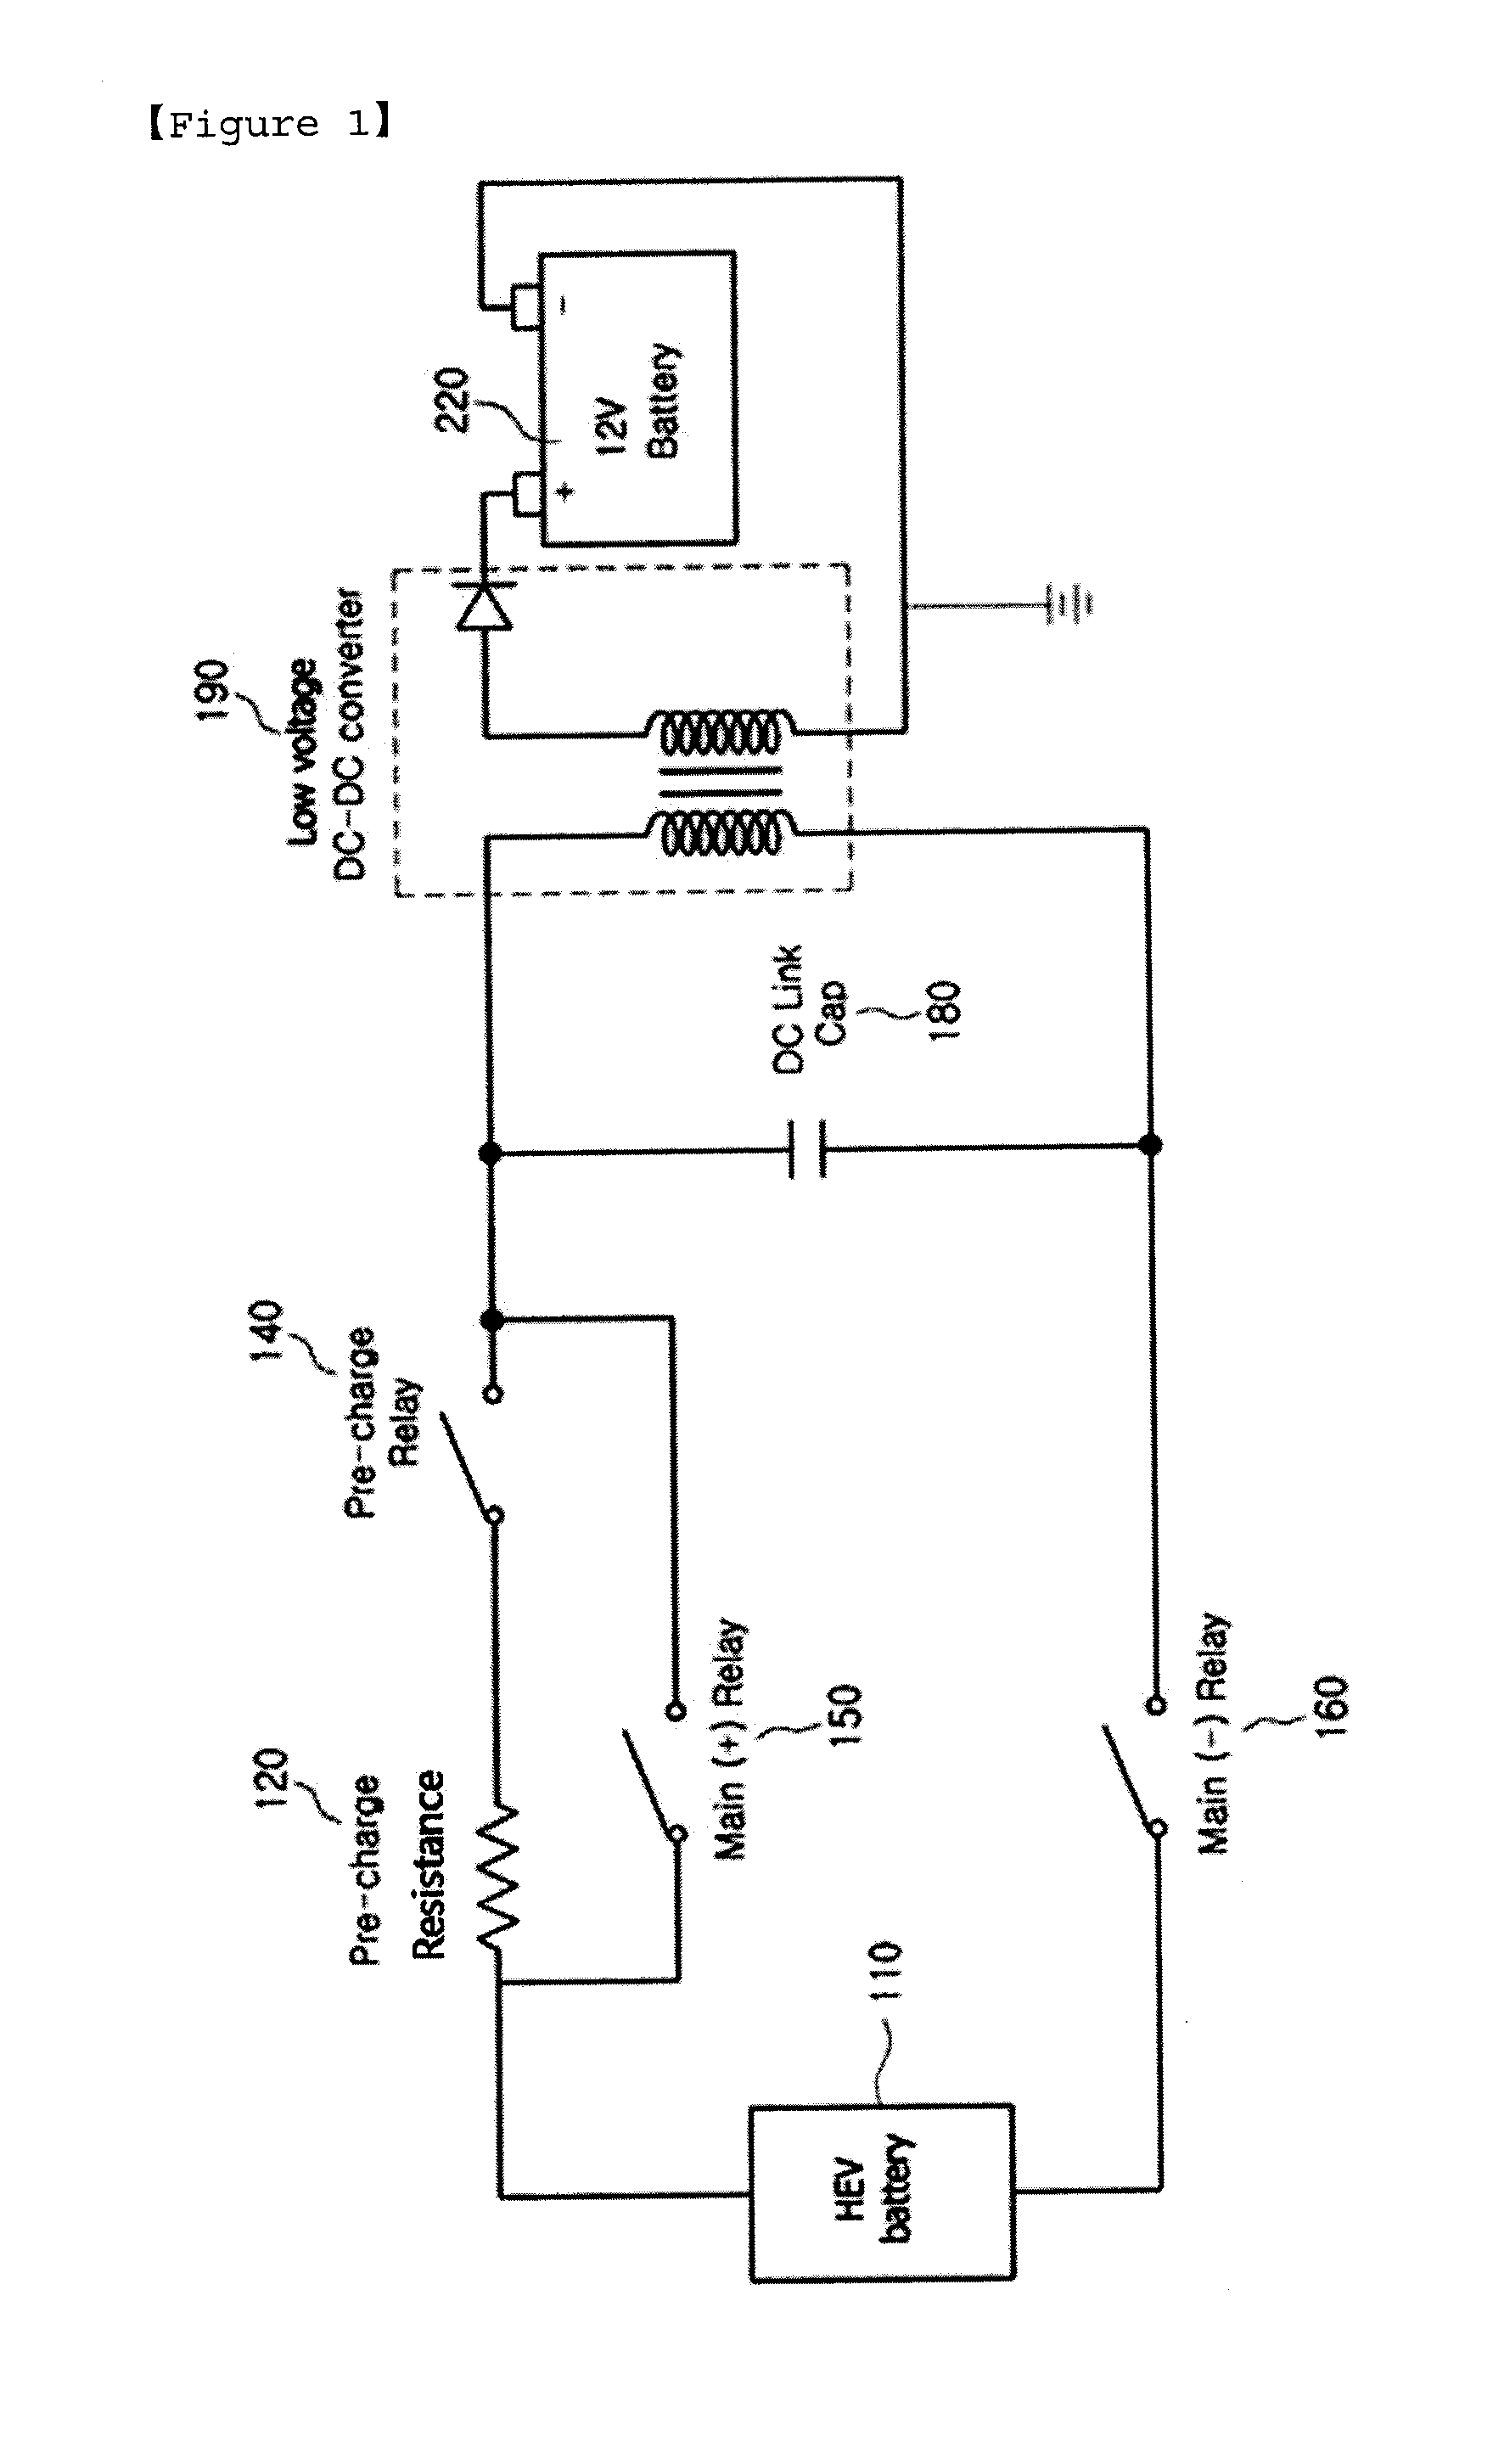 Circuit Apparatus for Protecting a Pre-Charge Resistance Using an Interlock Switch